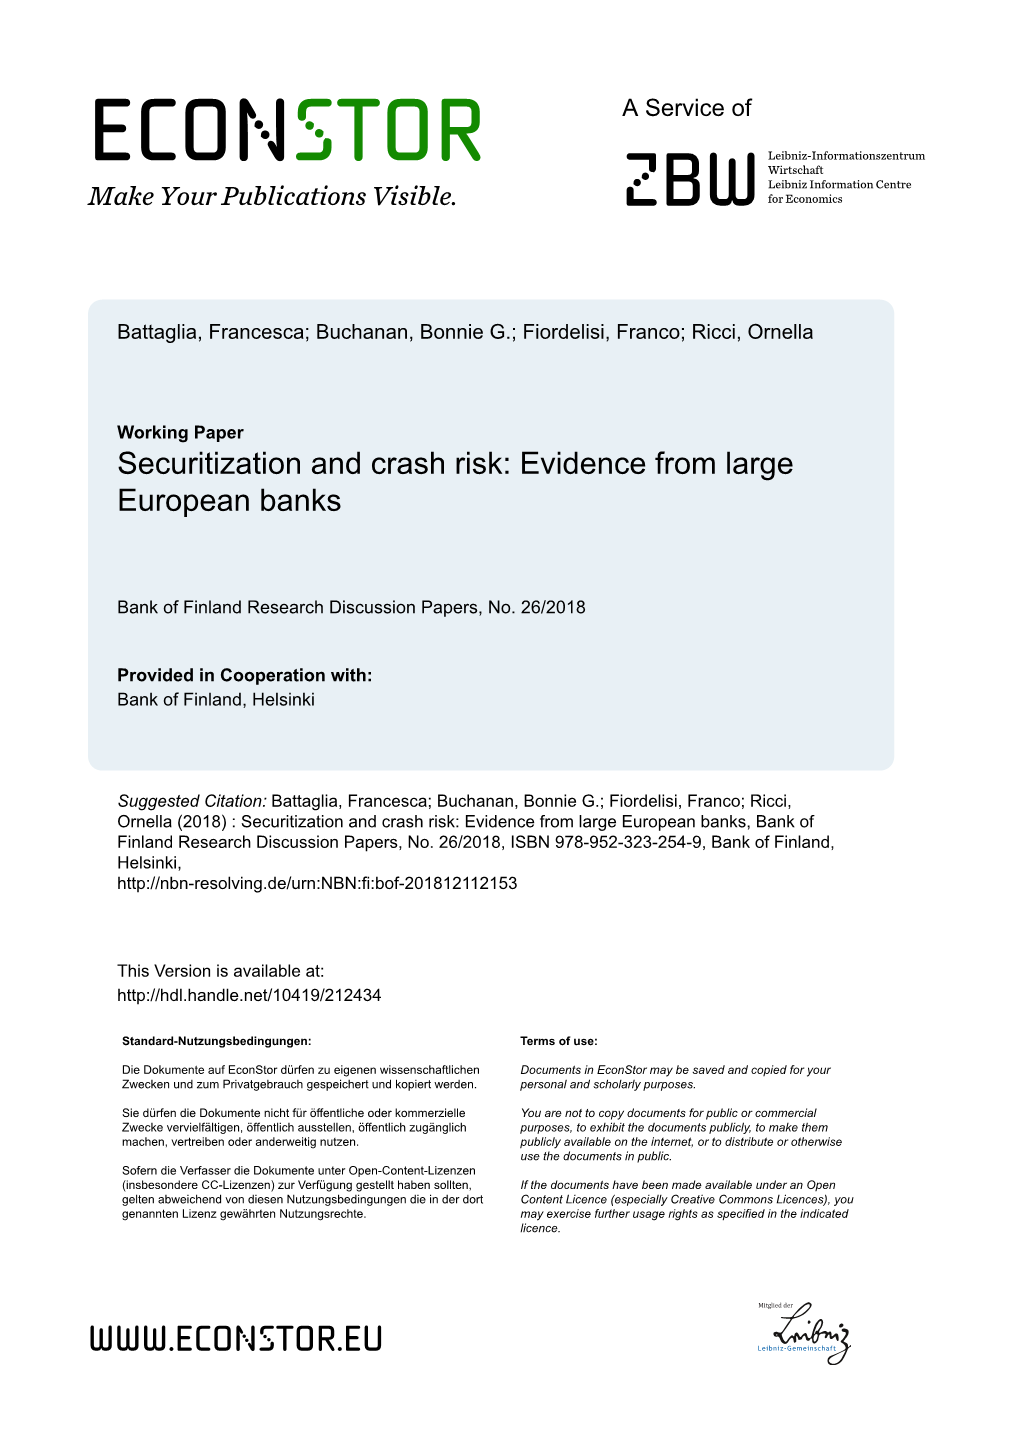 Securitization and Crash Risk: Evidence from Large European Banks